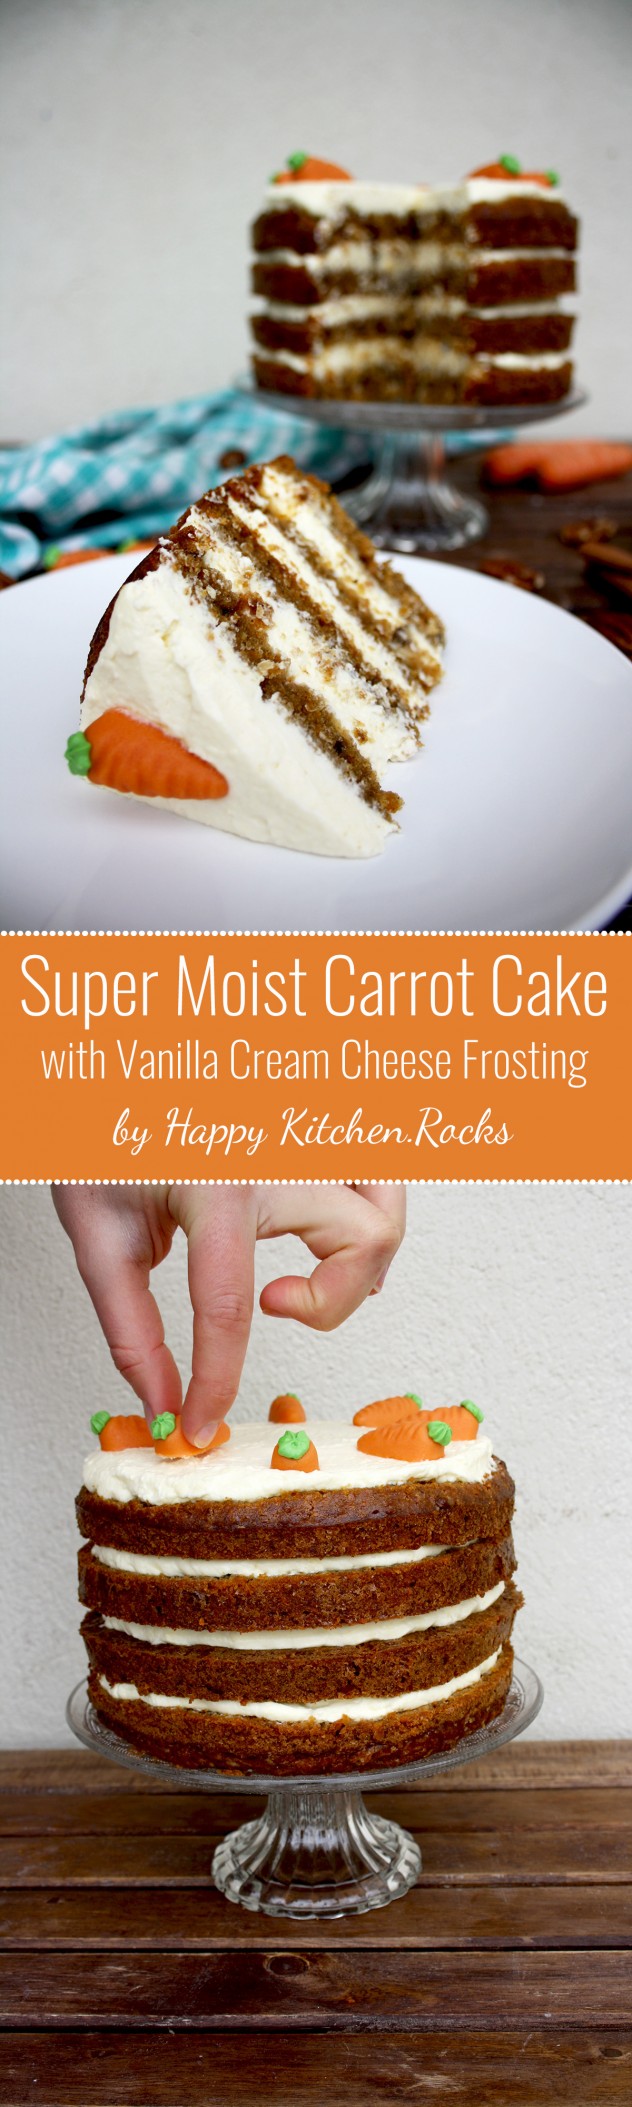 This tender and moist carrot cake with vanilla cream cheese frosting is by far the best I've ever tried. The secret ingredient in this easy step-by-step recipe is olive oil. No white sugar!